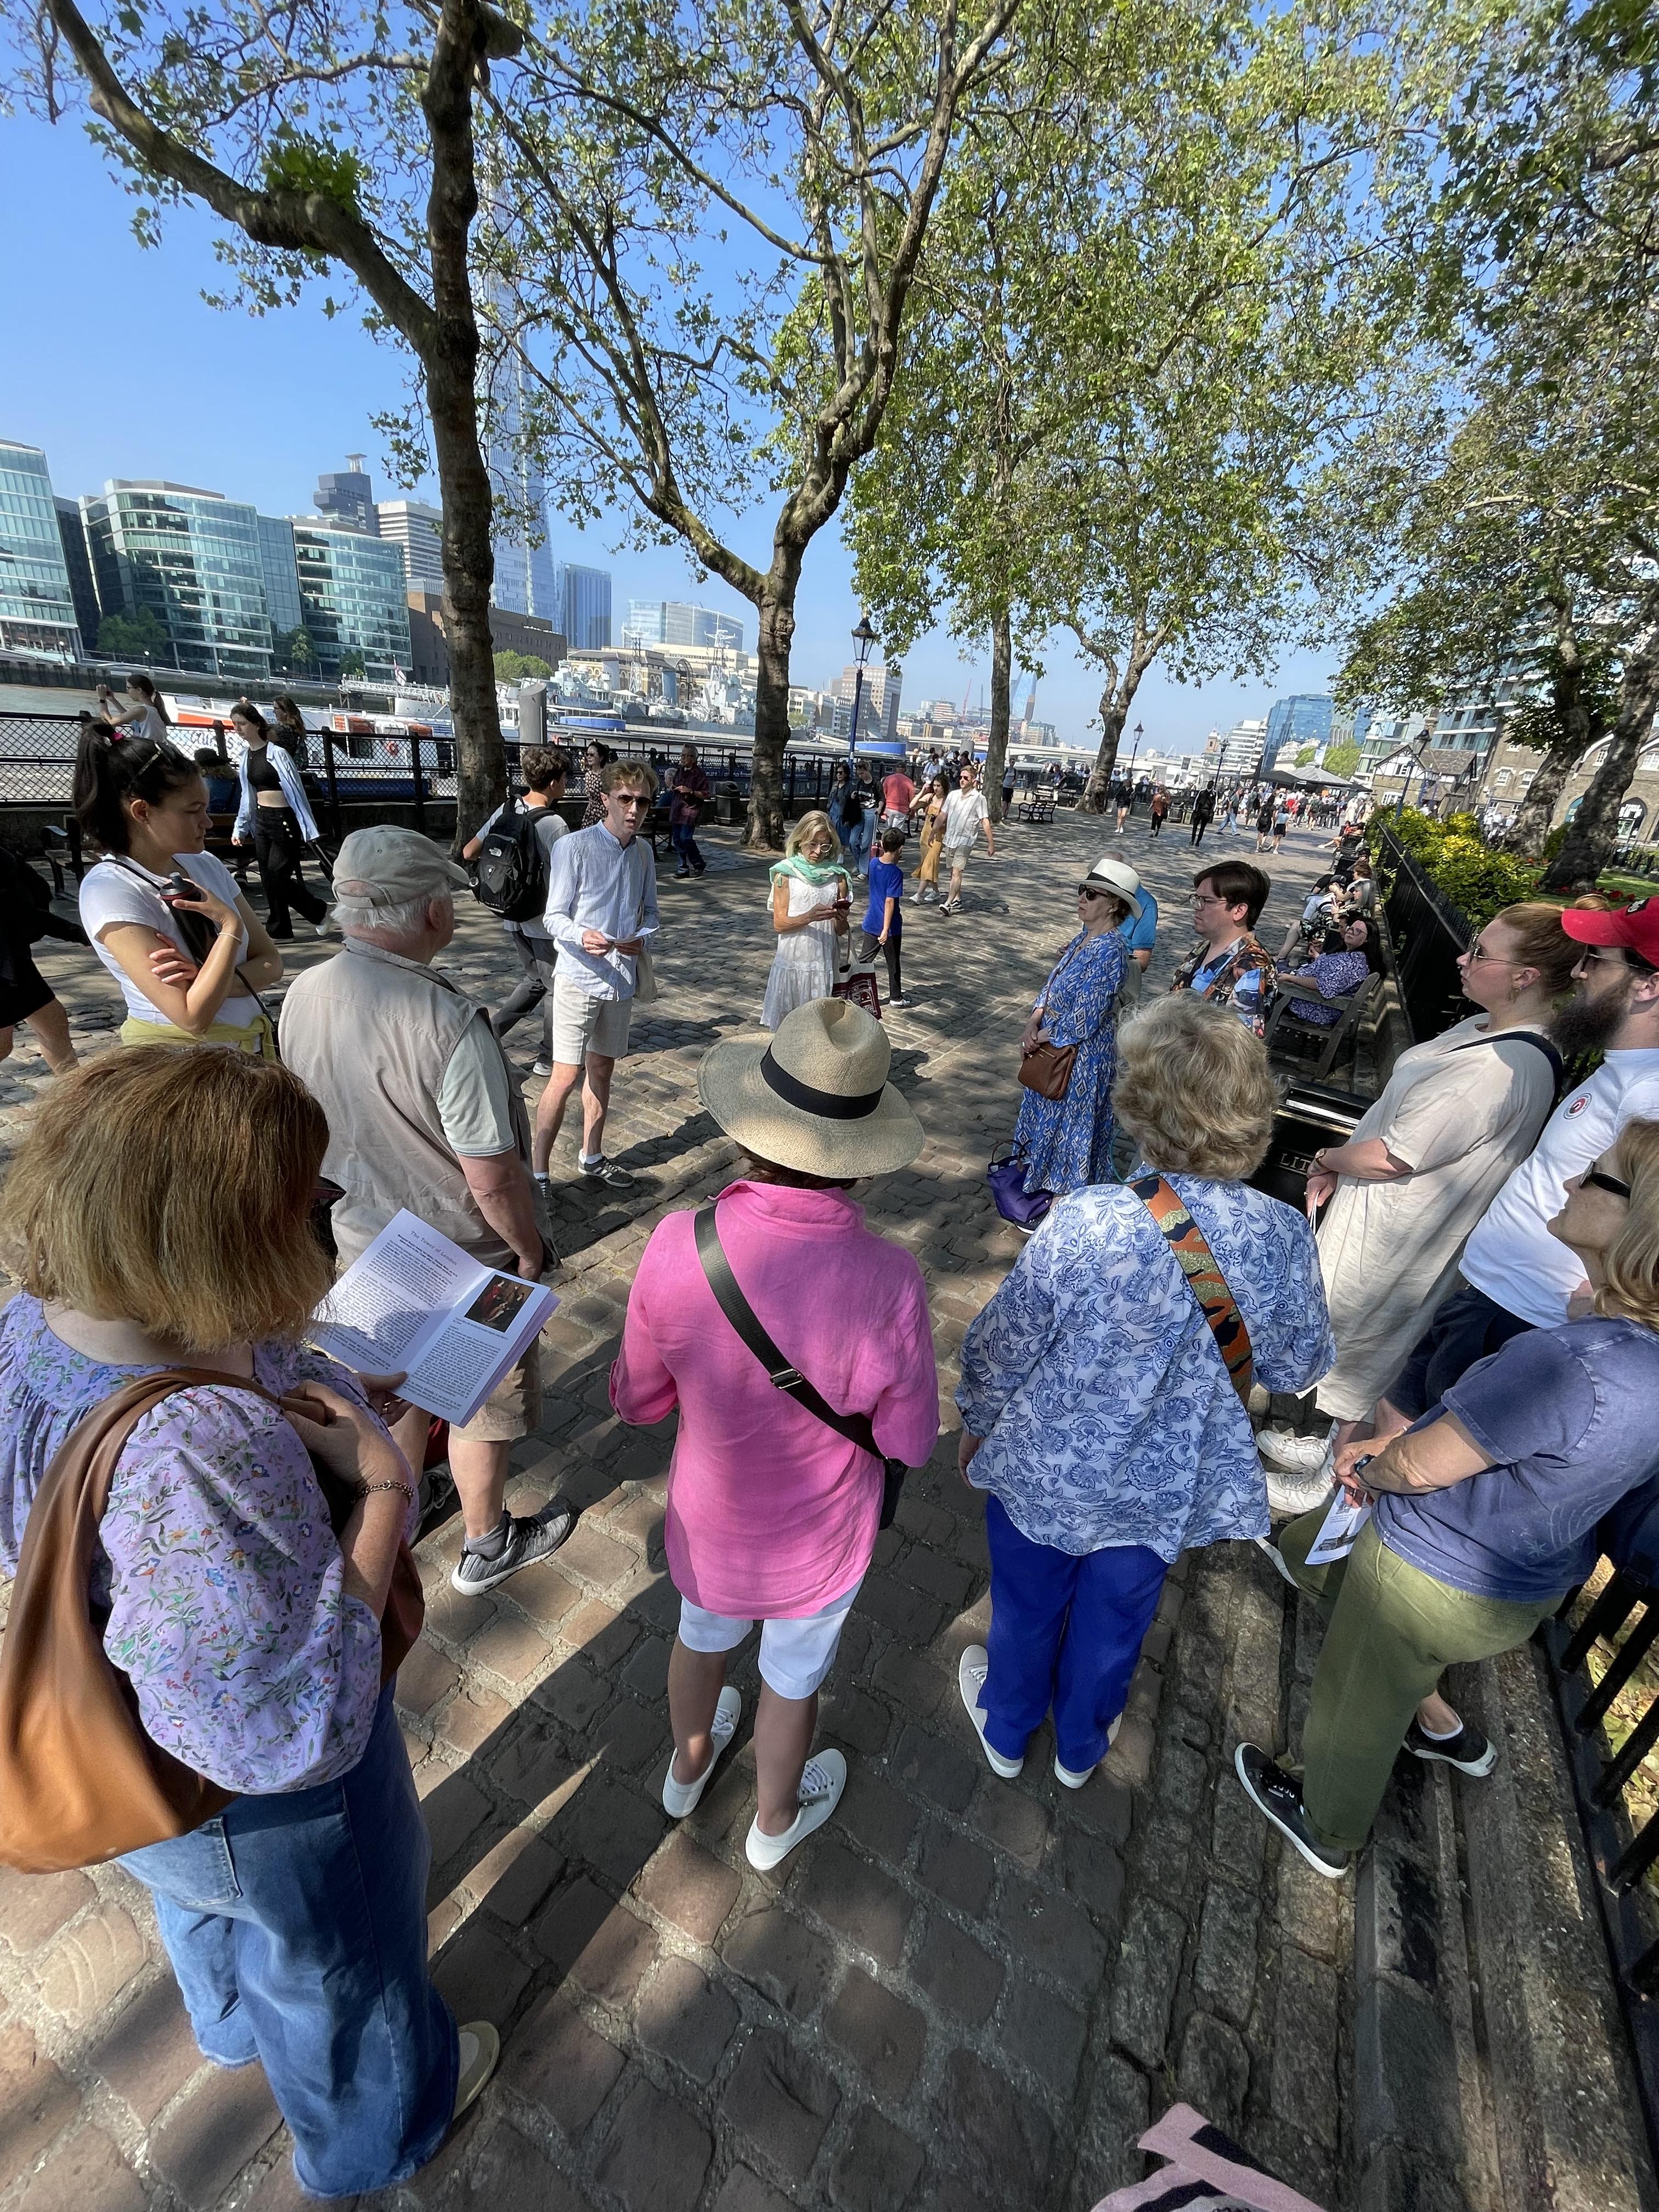 Alexander Gould, a white man with curly brown hair, presenting to the tour group on the bank of the Thames next to the Tower of London. In the background is the river, buildings including the Shard, large trees and blue sky.